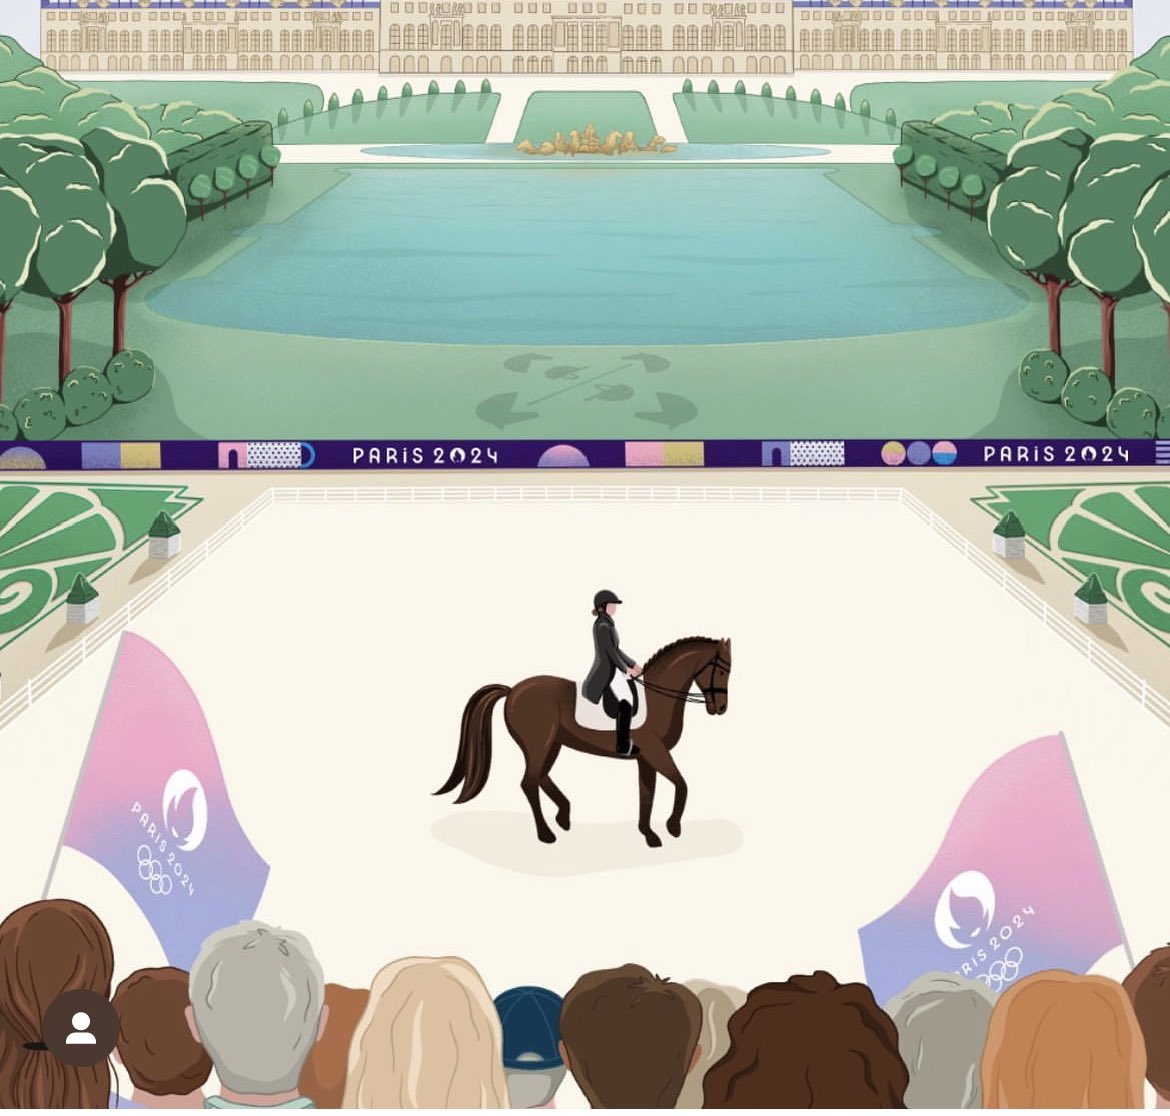 500 days to go before the Equestrian events at the Paris Olympics 2024 start at the Chateau de Versailles. Excited to be a part of this @Paris2024 @FEI_Global #dressage